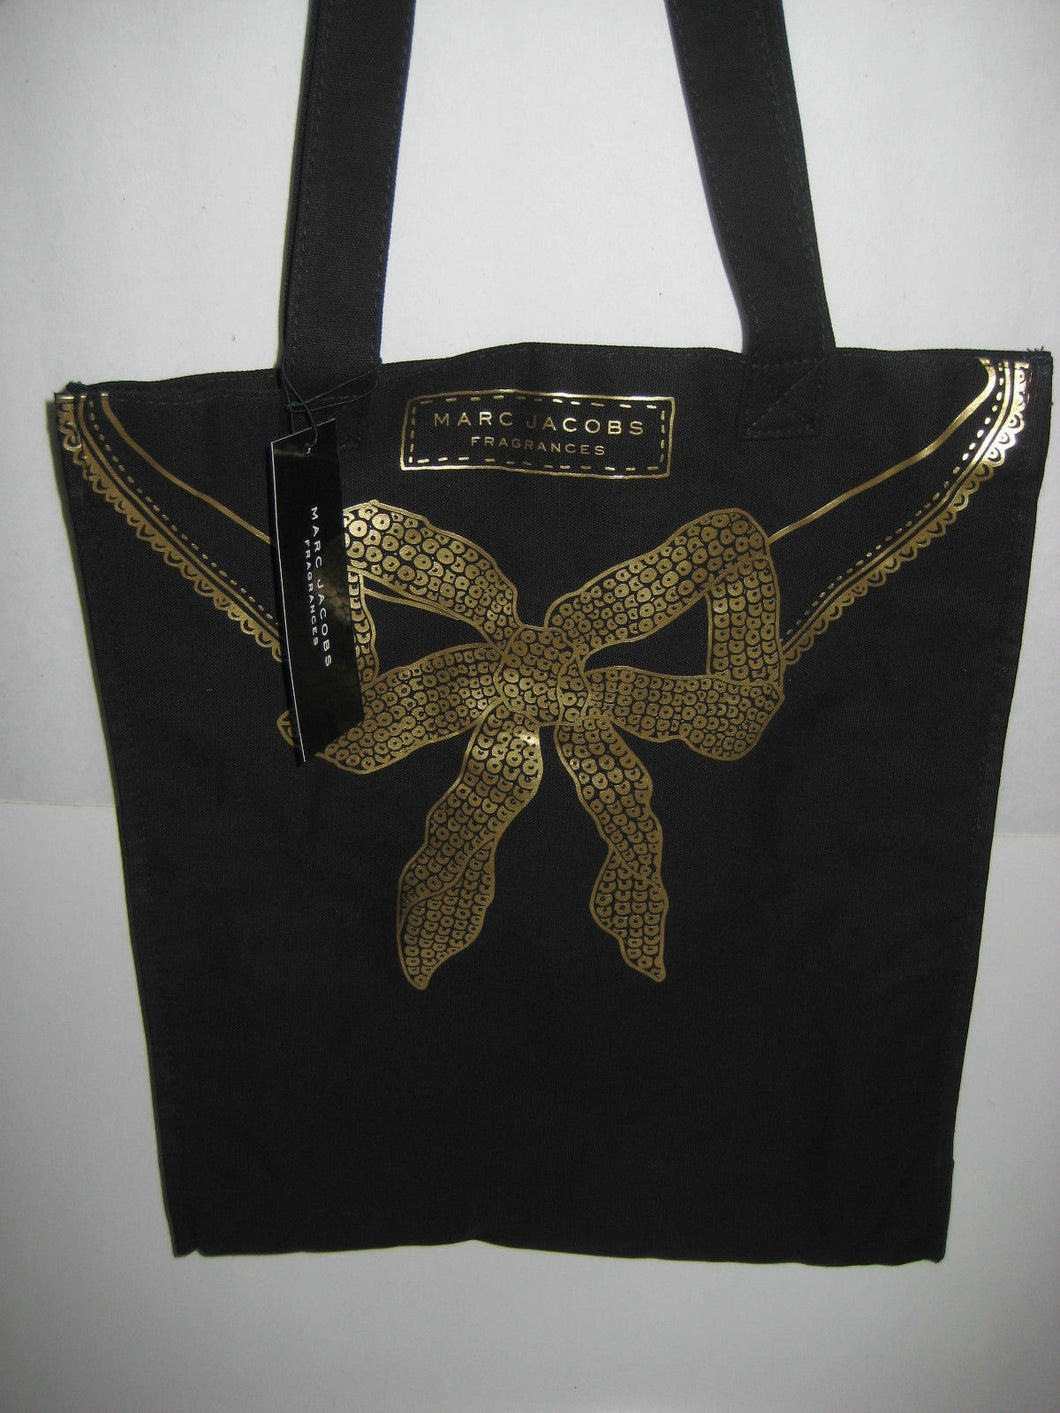 Marc Jacobs Fragrances Women Tote Bag Black Canvas Gold Bow Brand New With Tag